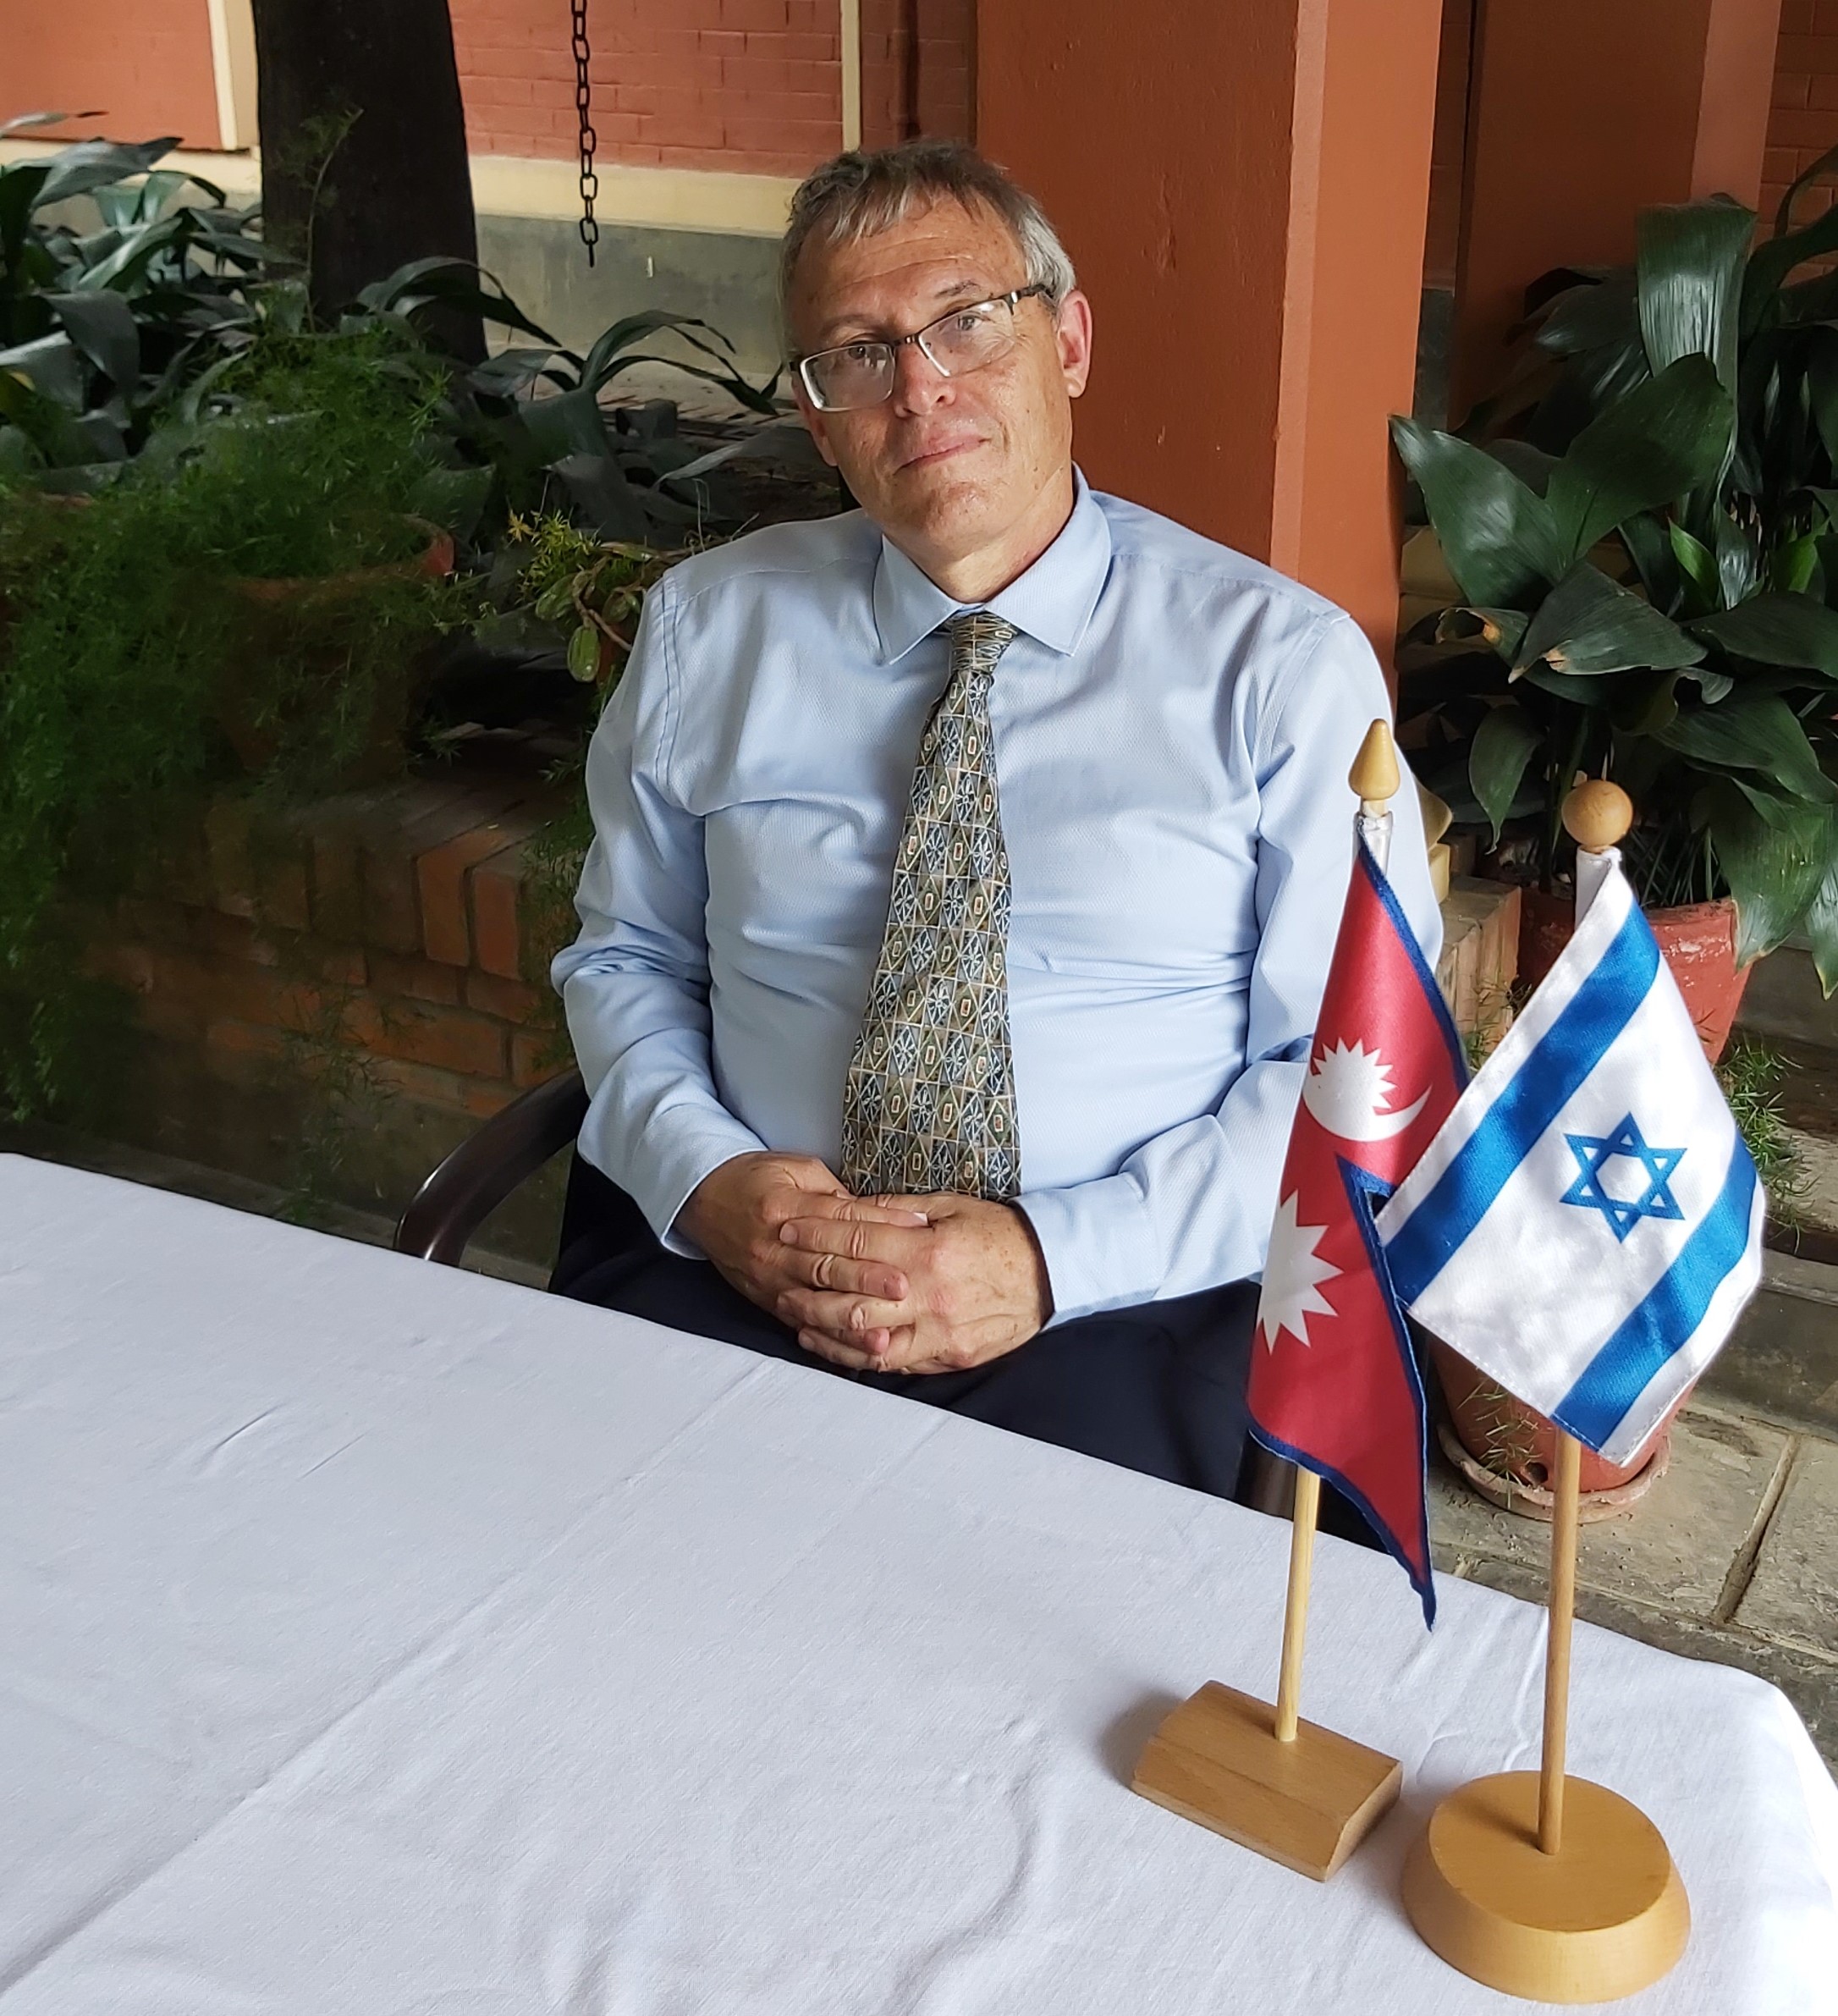 nepal-israel-bilateral-ties-are-very-good-and-we-need-to-focus-on-multilateral-ones-ambassador-goder